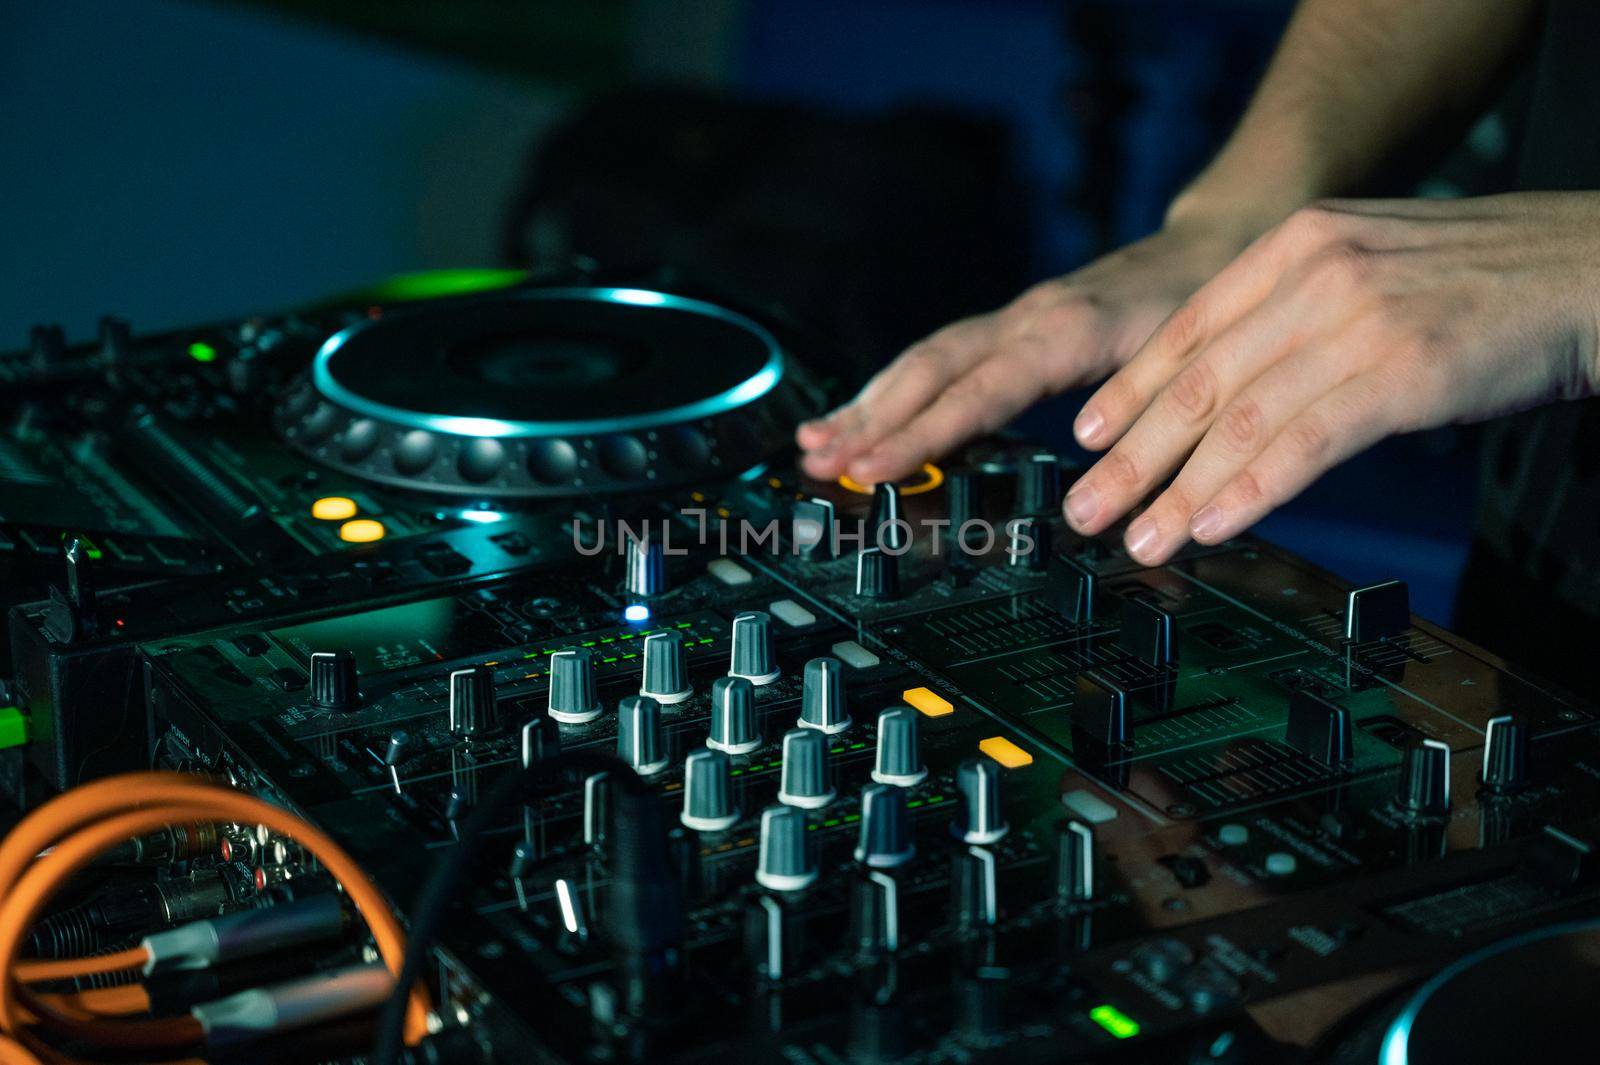 Dj mixing at party festival with light and smoke in background - Summer nightlife view of disco club inside.High quality photography.